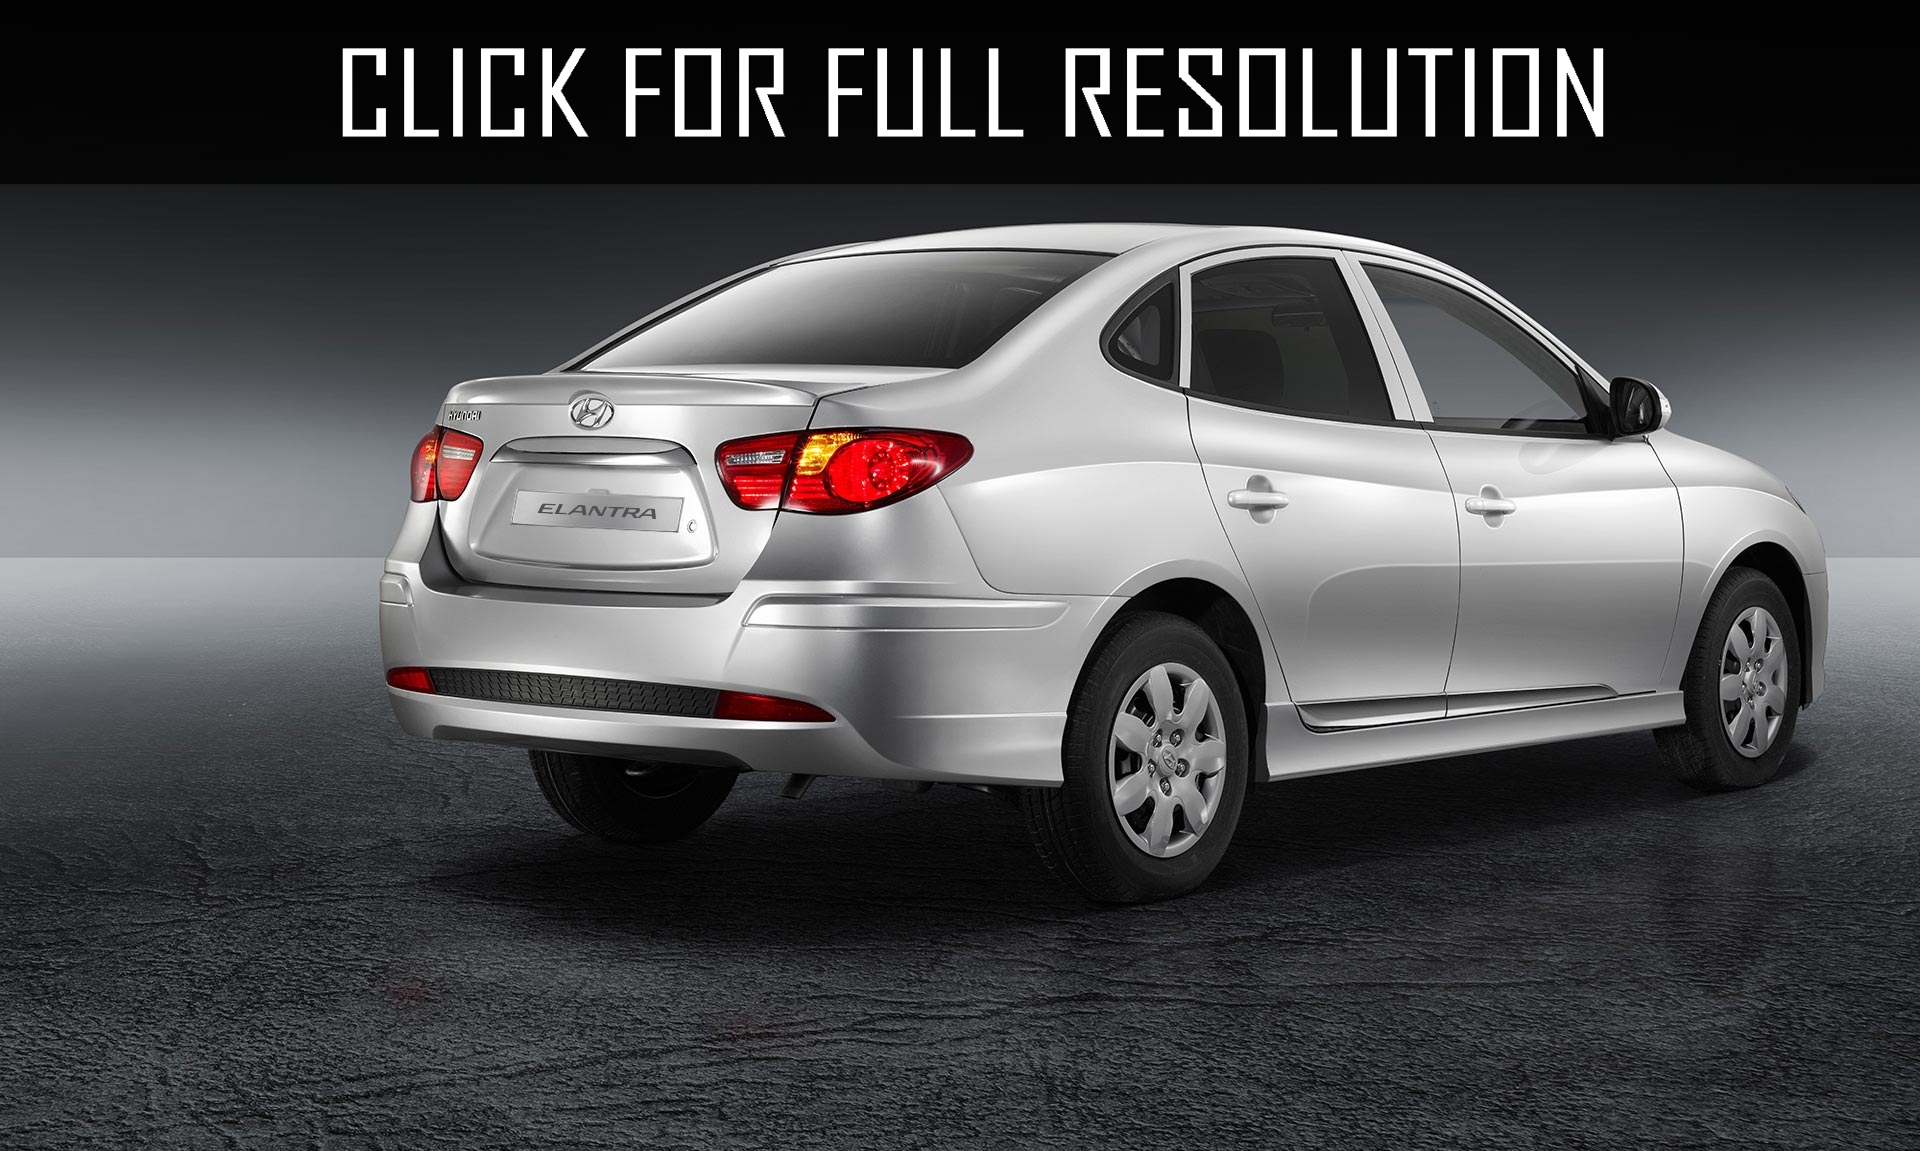 Hyundai Elantra Hd Amazing Photo Gallery Some Information And Specifications As Well As 2264